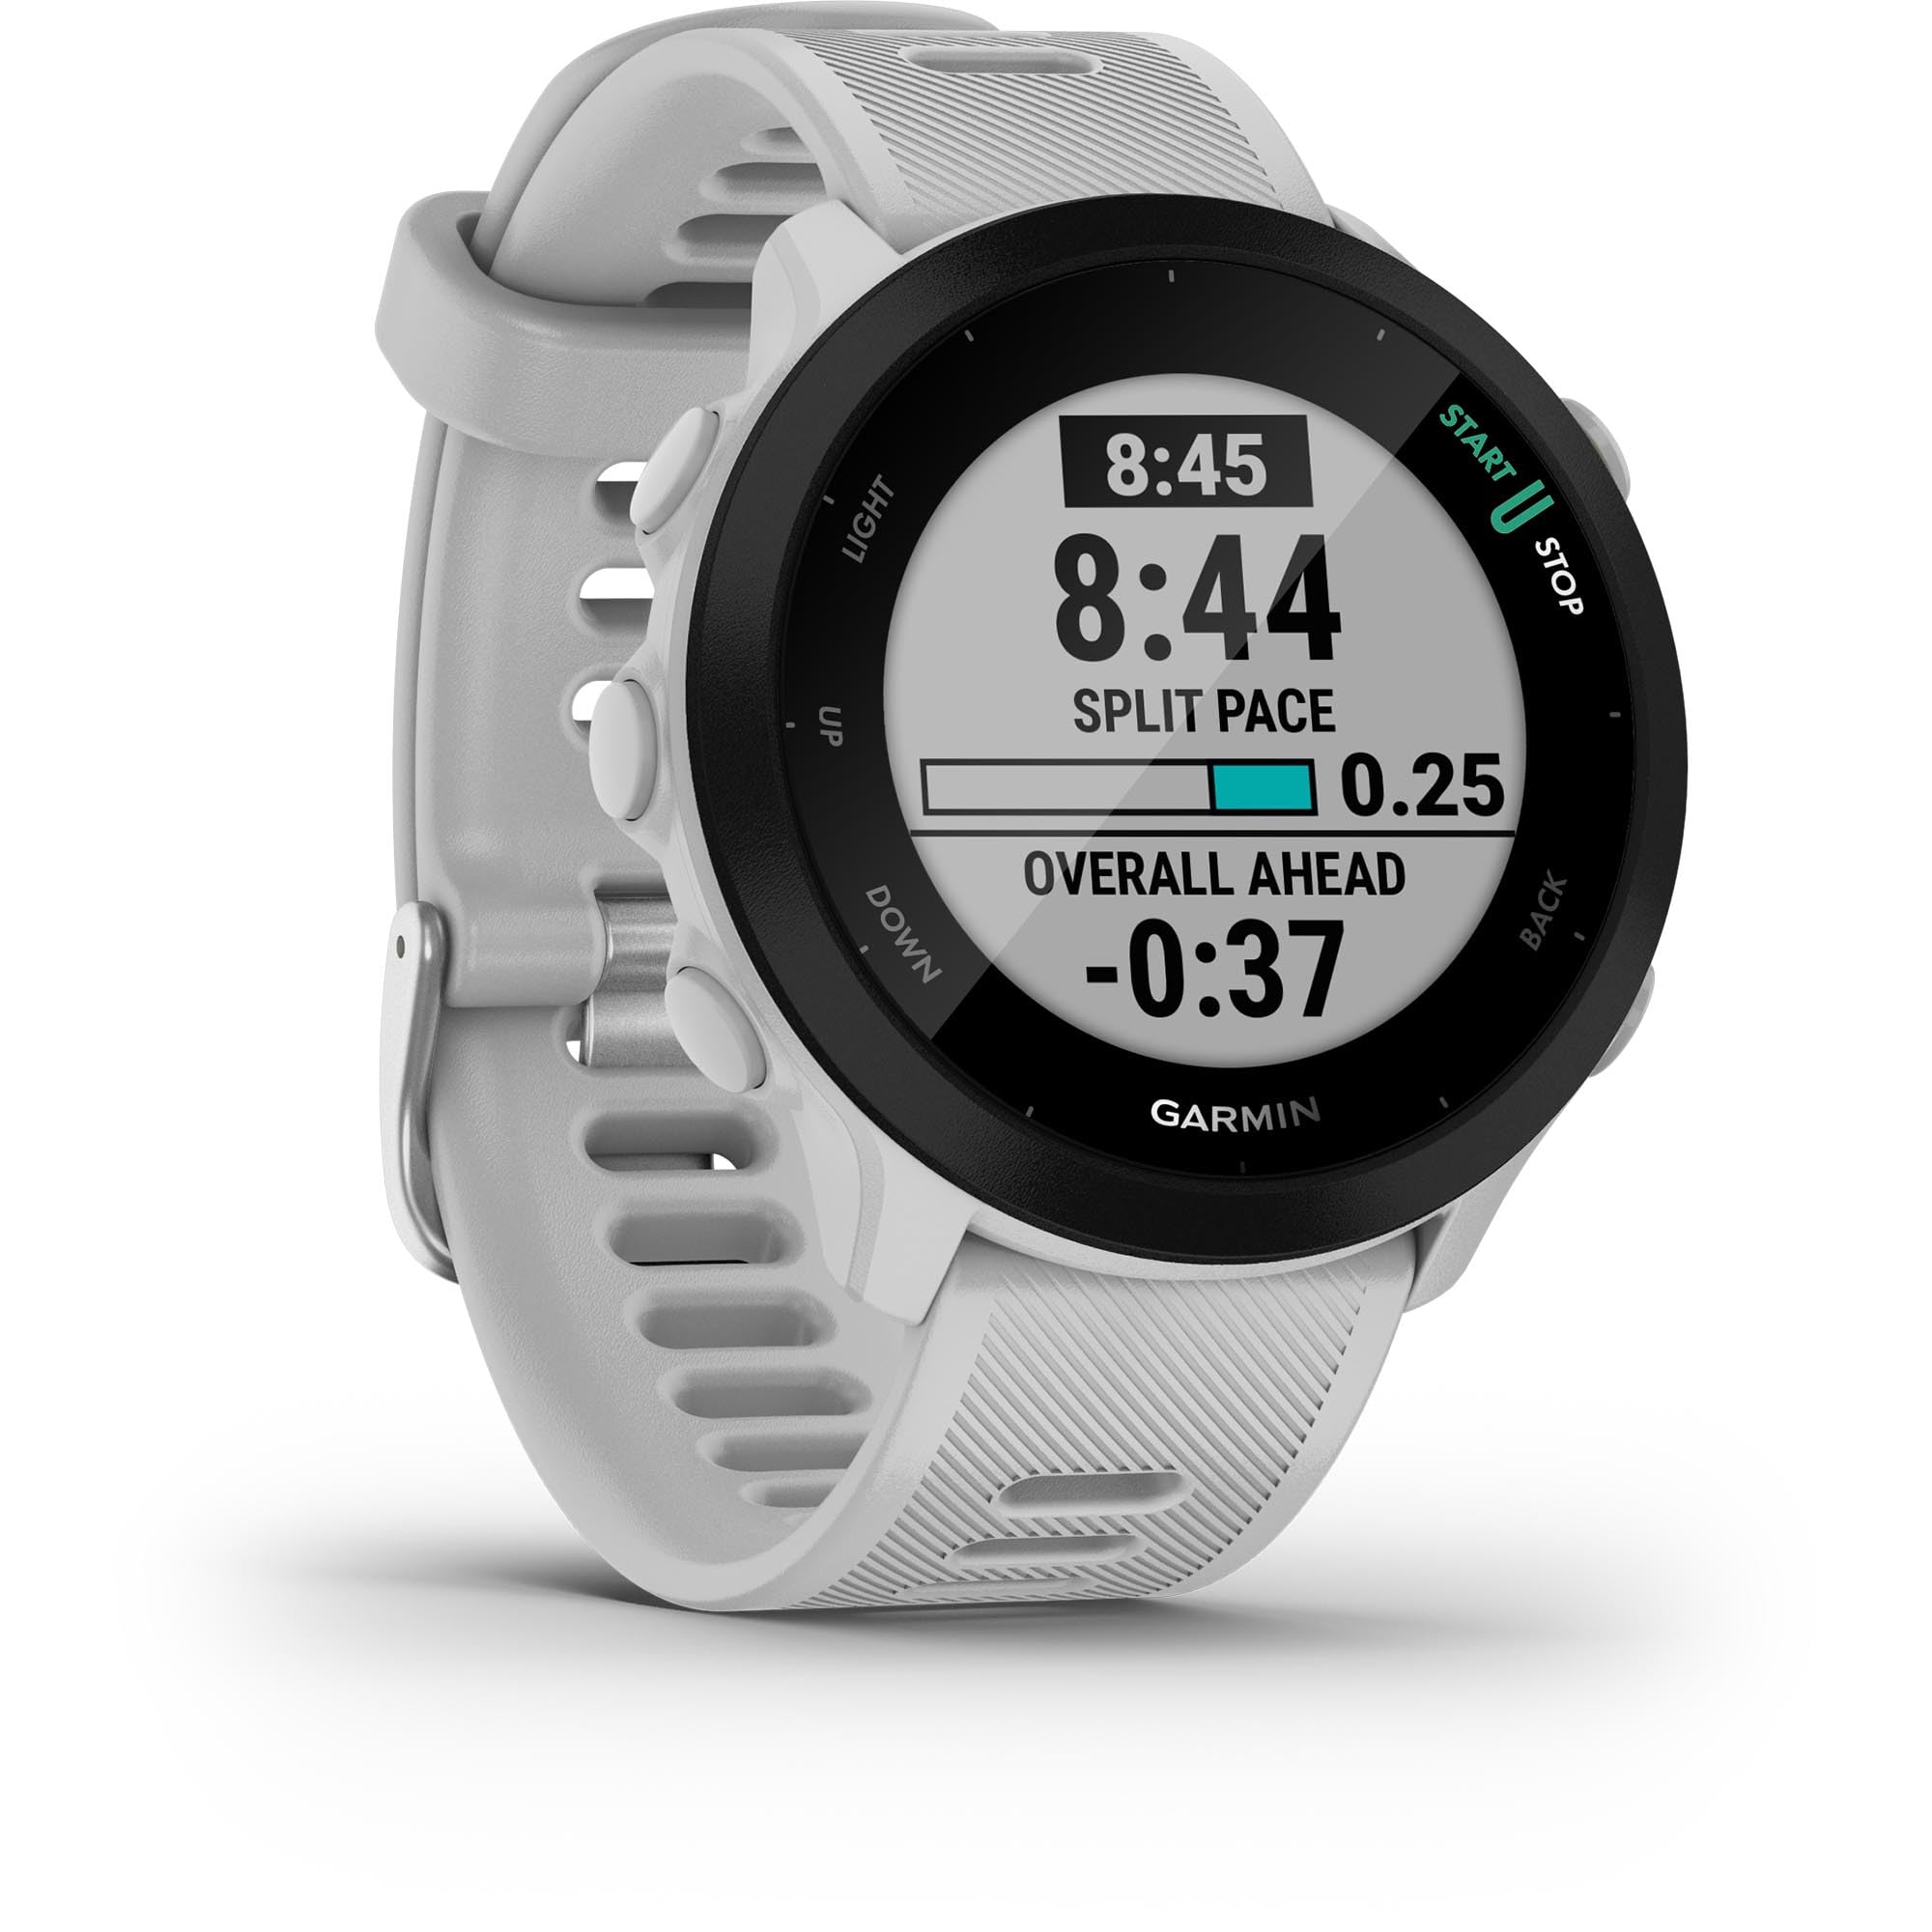 Garmin Forerunner 55, GPS Running Watch with Daily Suggested Workouts, Up to 2 weeks of Battery Life, White